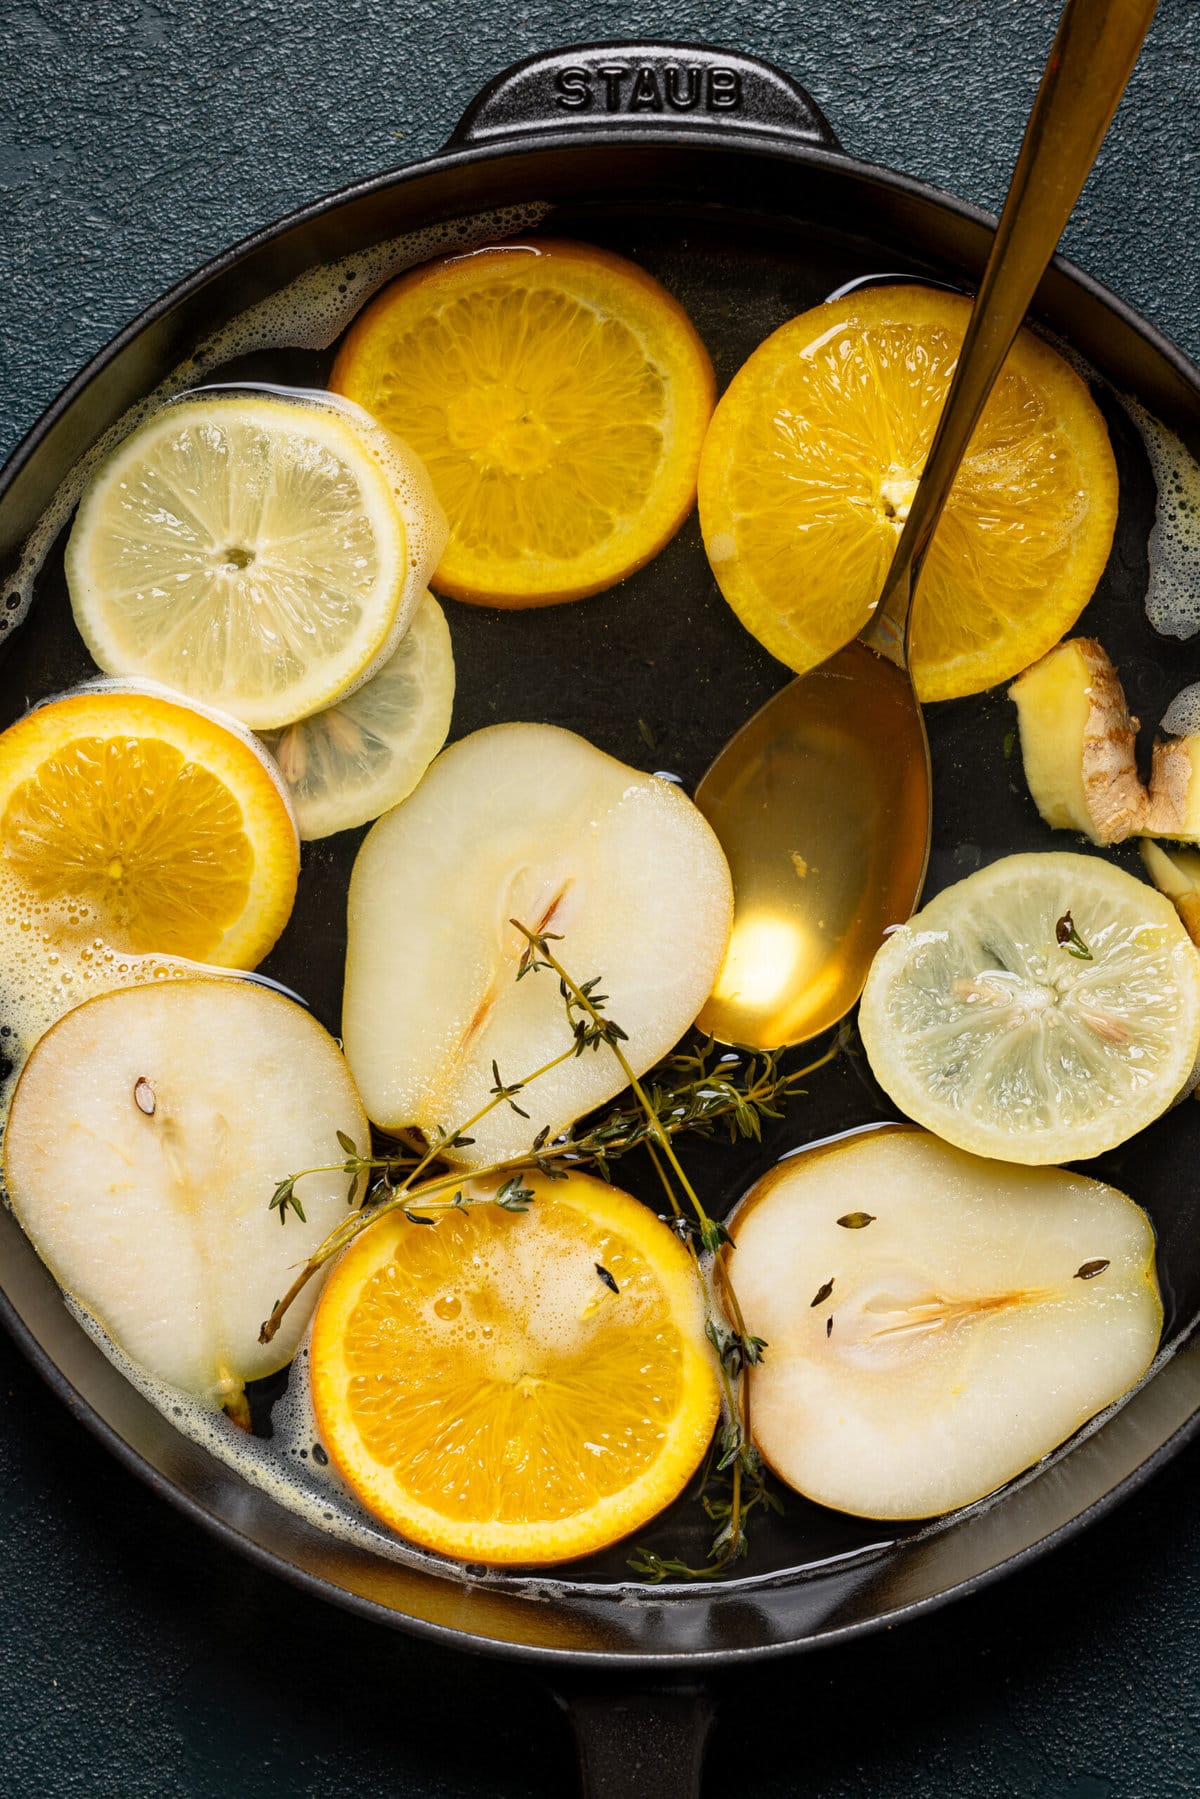 Slices of citrus, pears, and thyme sprigs steeping in a pot with a gold spoon.